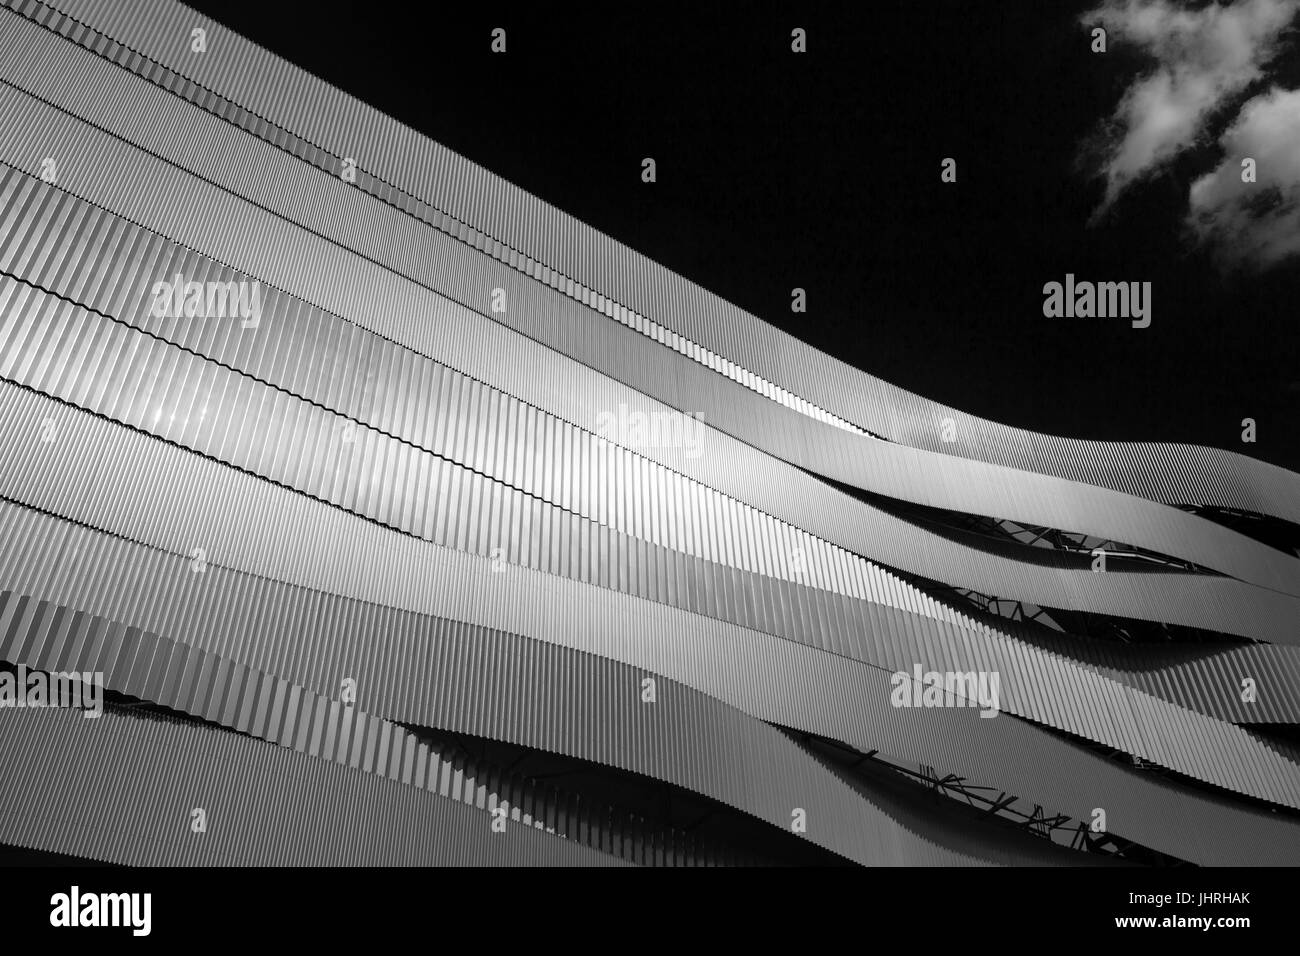 Waves of Danube Arena, modern architecture, black and white, Budapest, Hungary Stock Photo